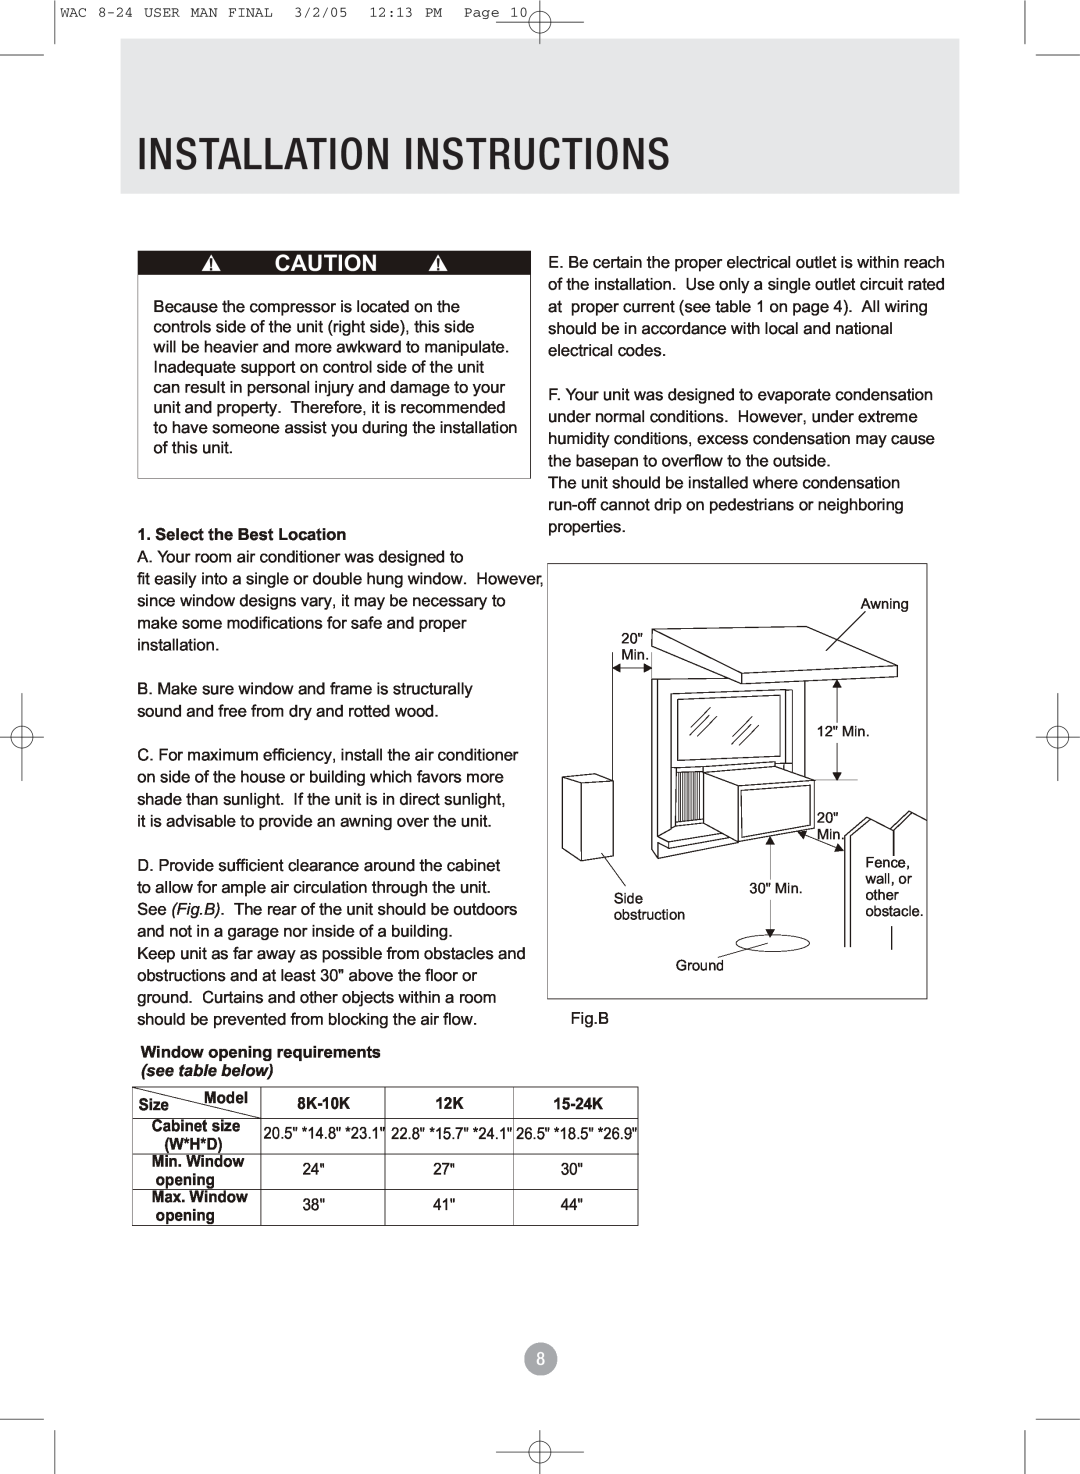 Admiral AAW-12CM1FHUE Installation Instructions, Select the Best Location, Window opening requirements see table below 